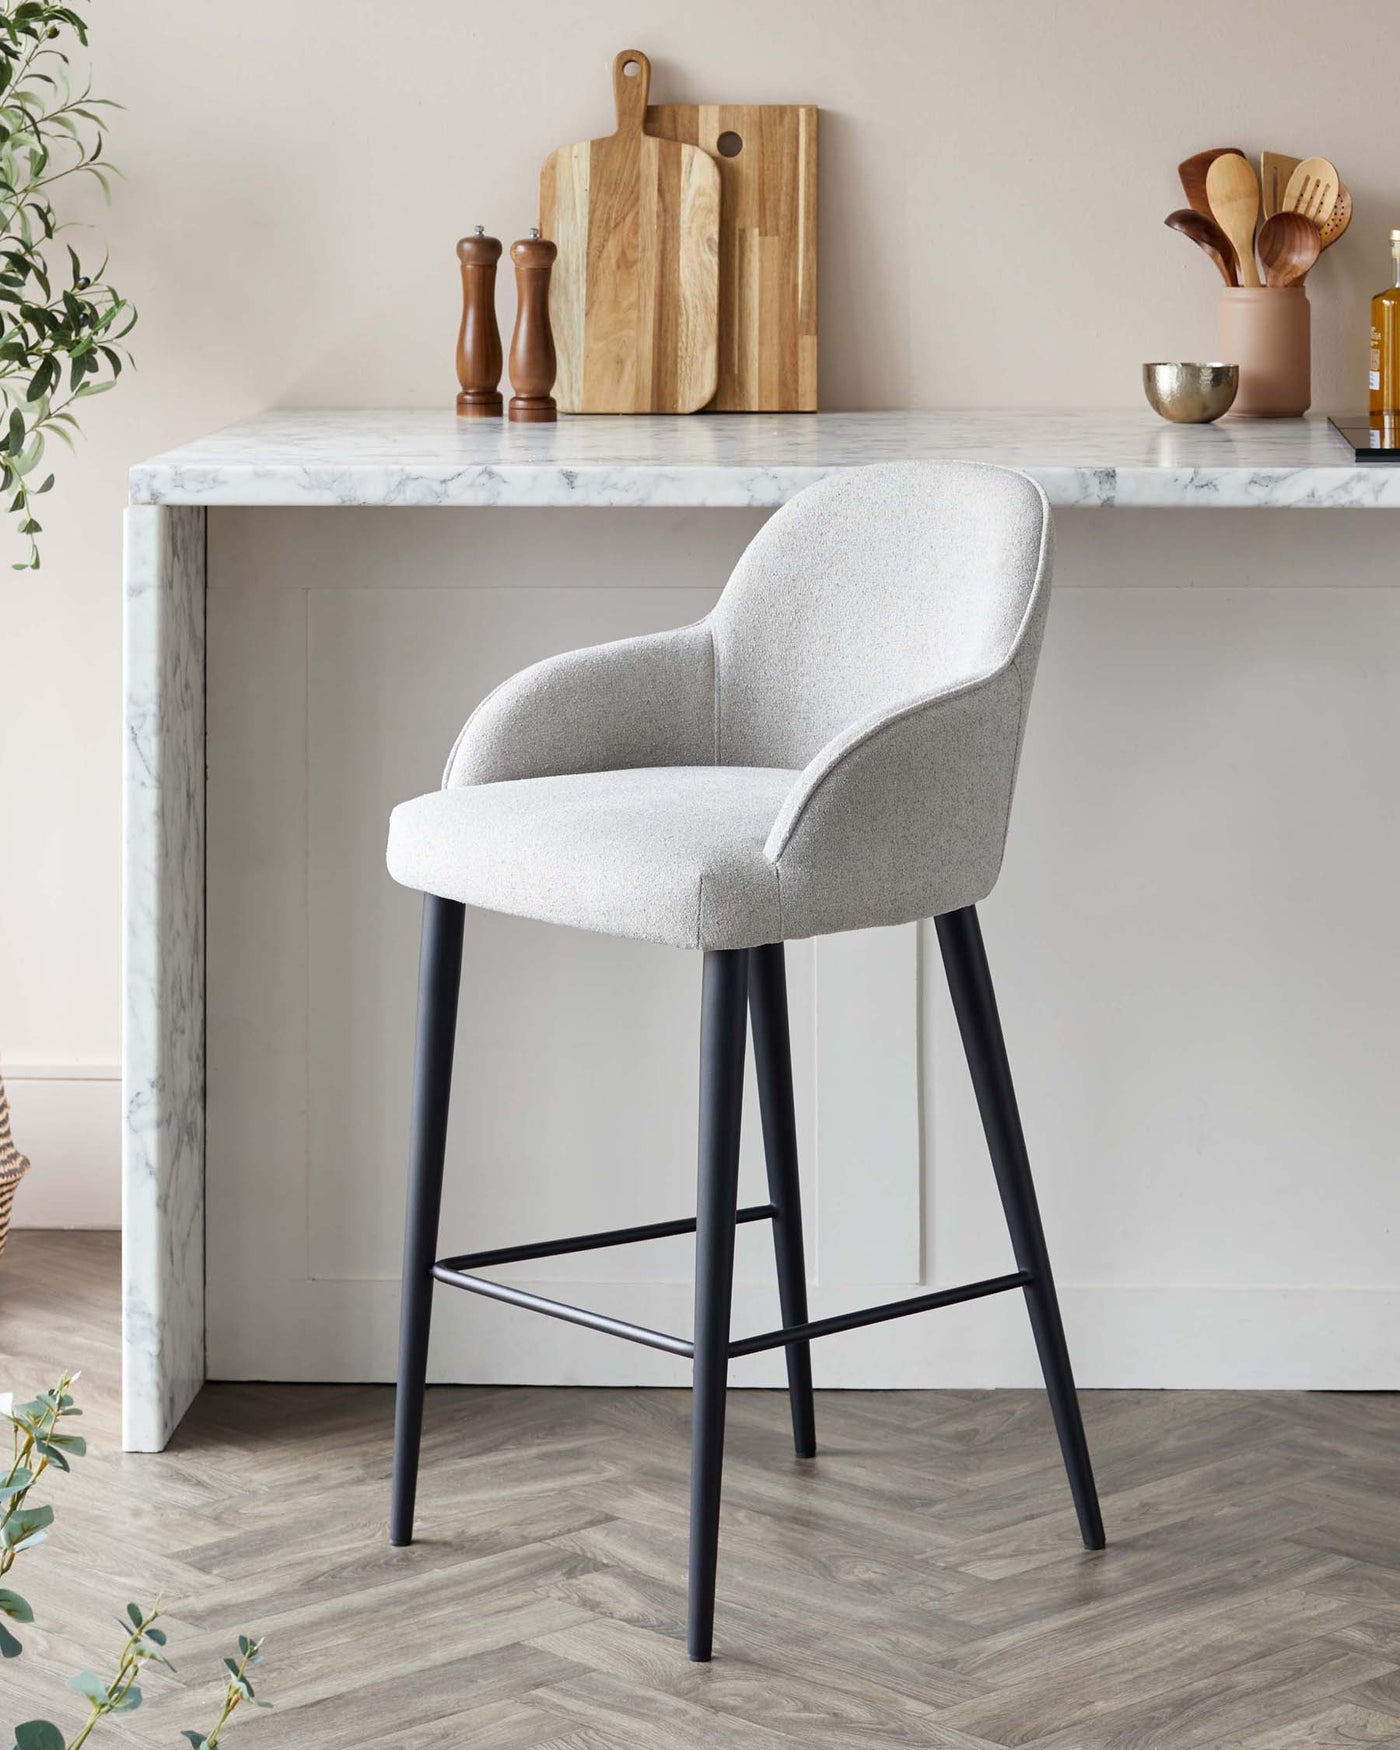 Elegant, modern bar stool with a curved backrest and plush light grey upholstery, featuring slender black metal legs with a footrest, complementing the sleek marble countertop of a minimalist kitchen island.